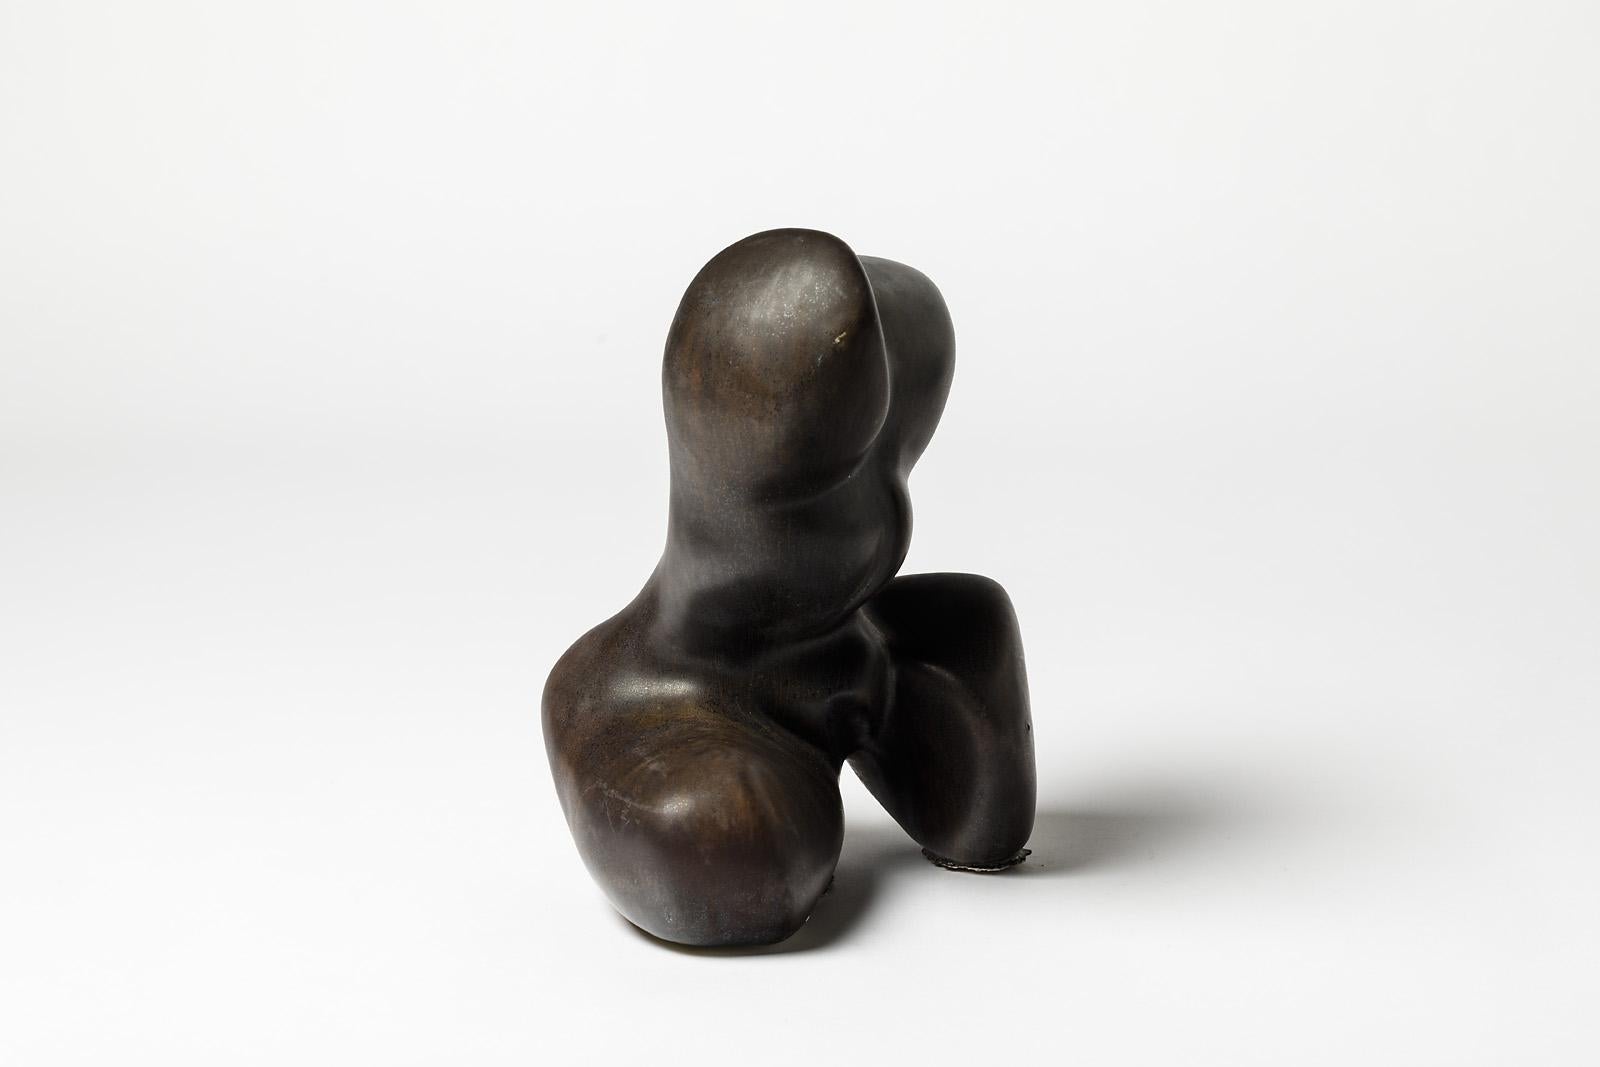 Late 20th Century Porcelain Sculpture with Black- Brown Glaze Decoration by Tim Orr, circa 1970